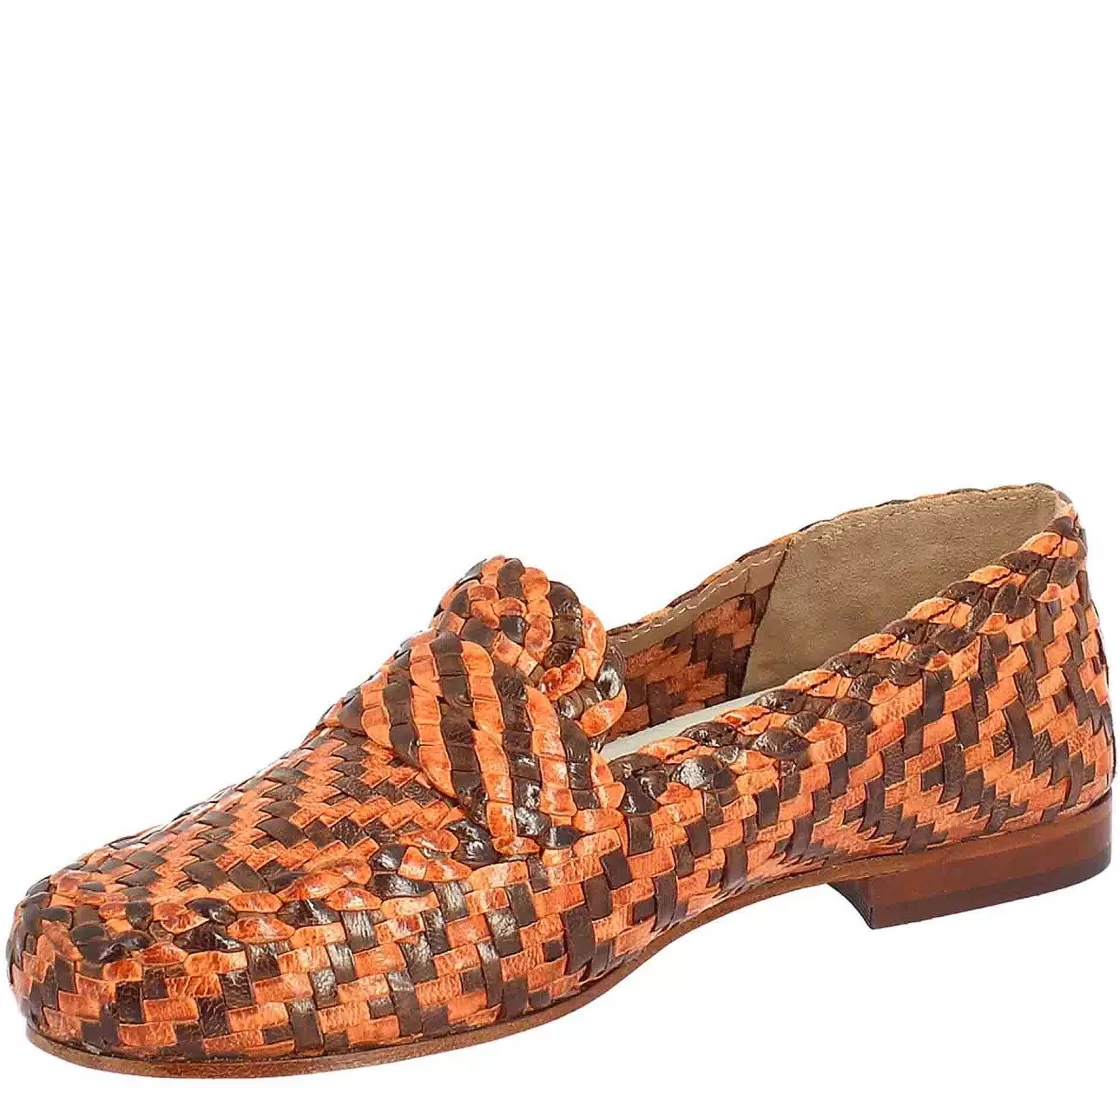 Leonardo Women'S Moccasins In Brown And Orange Woven Leather Cheap